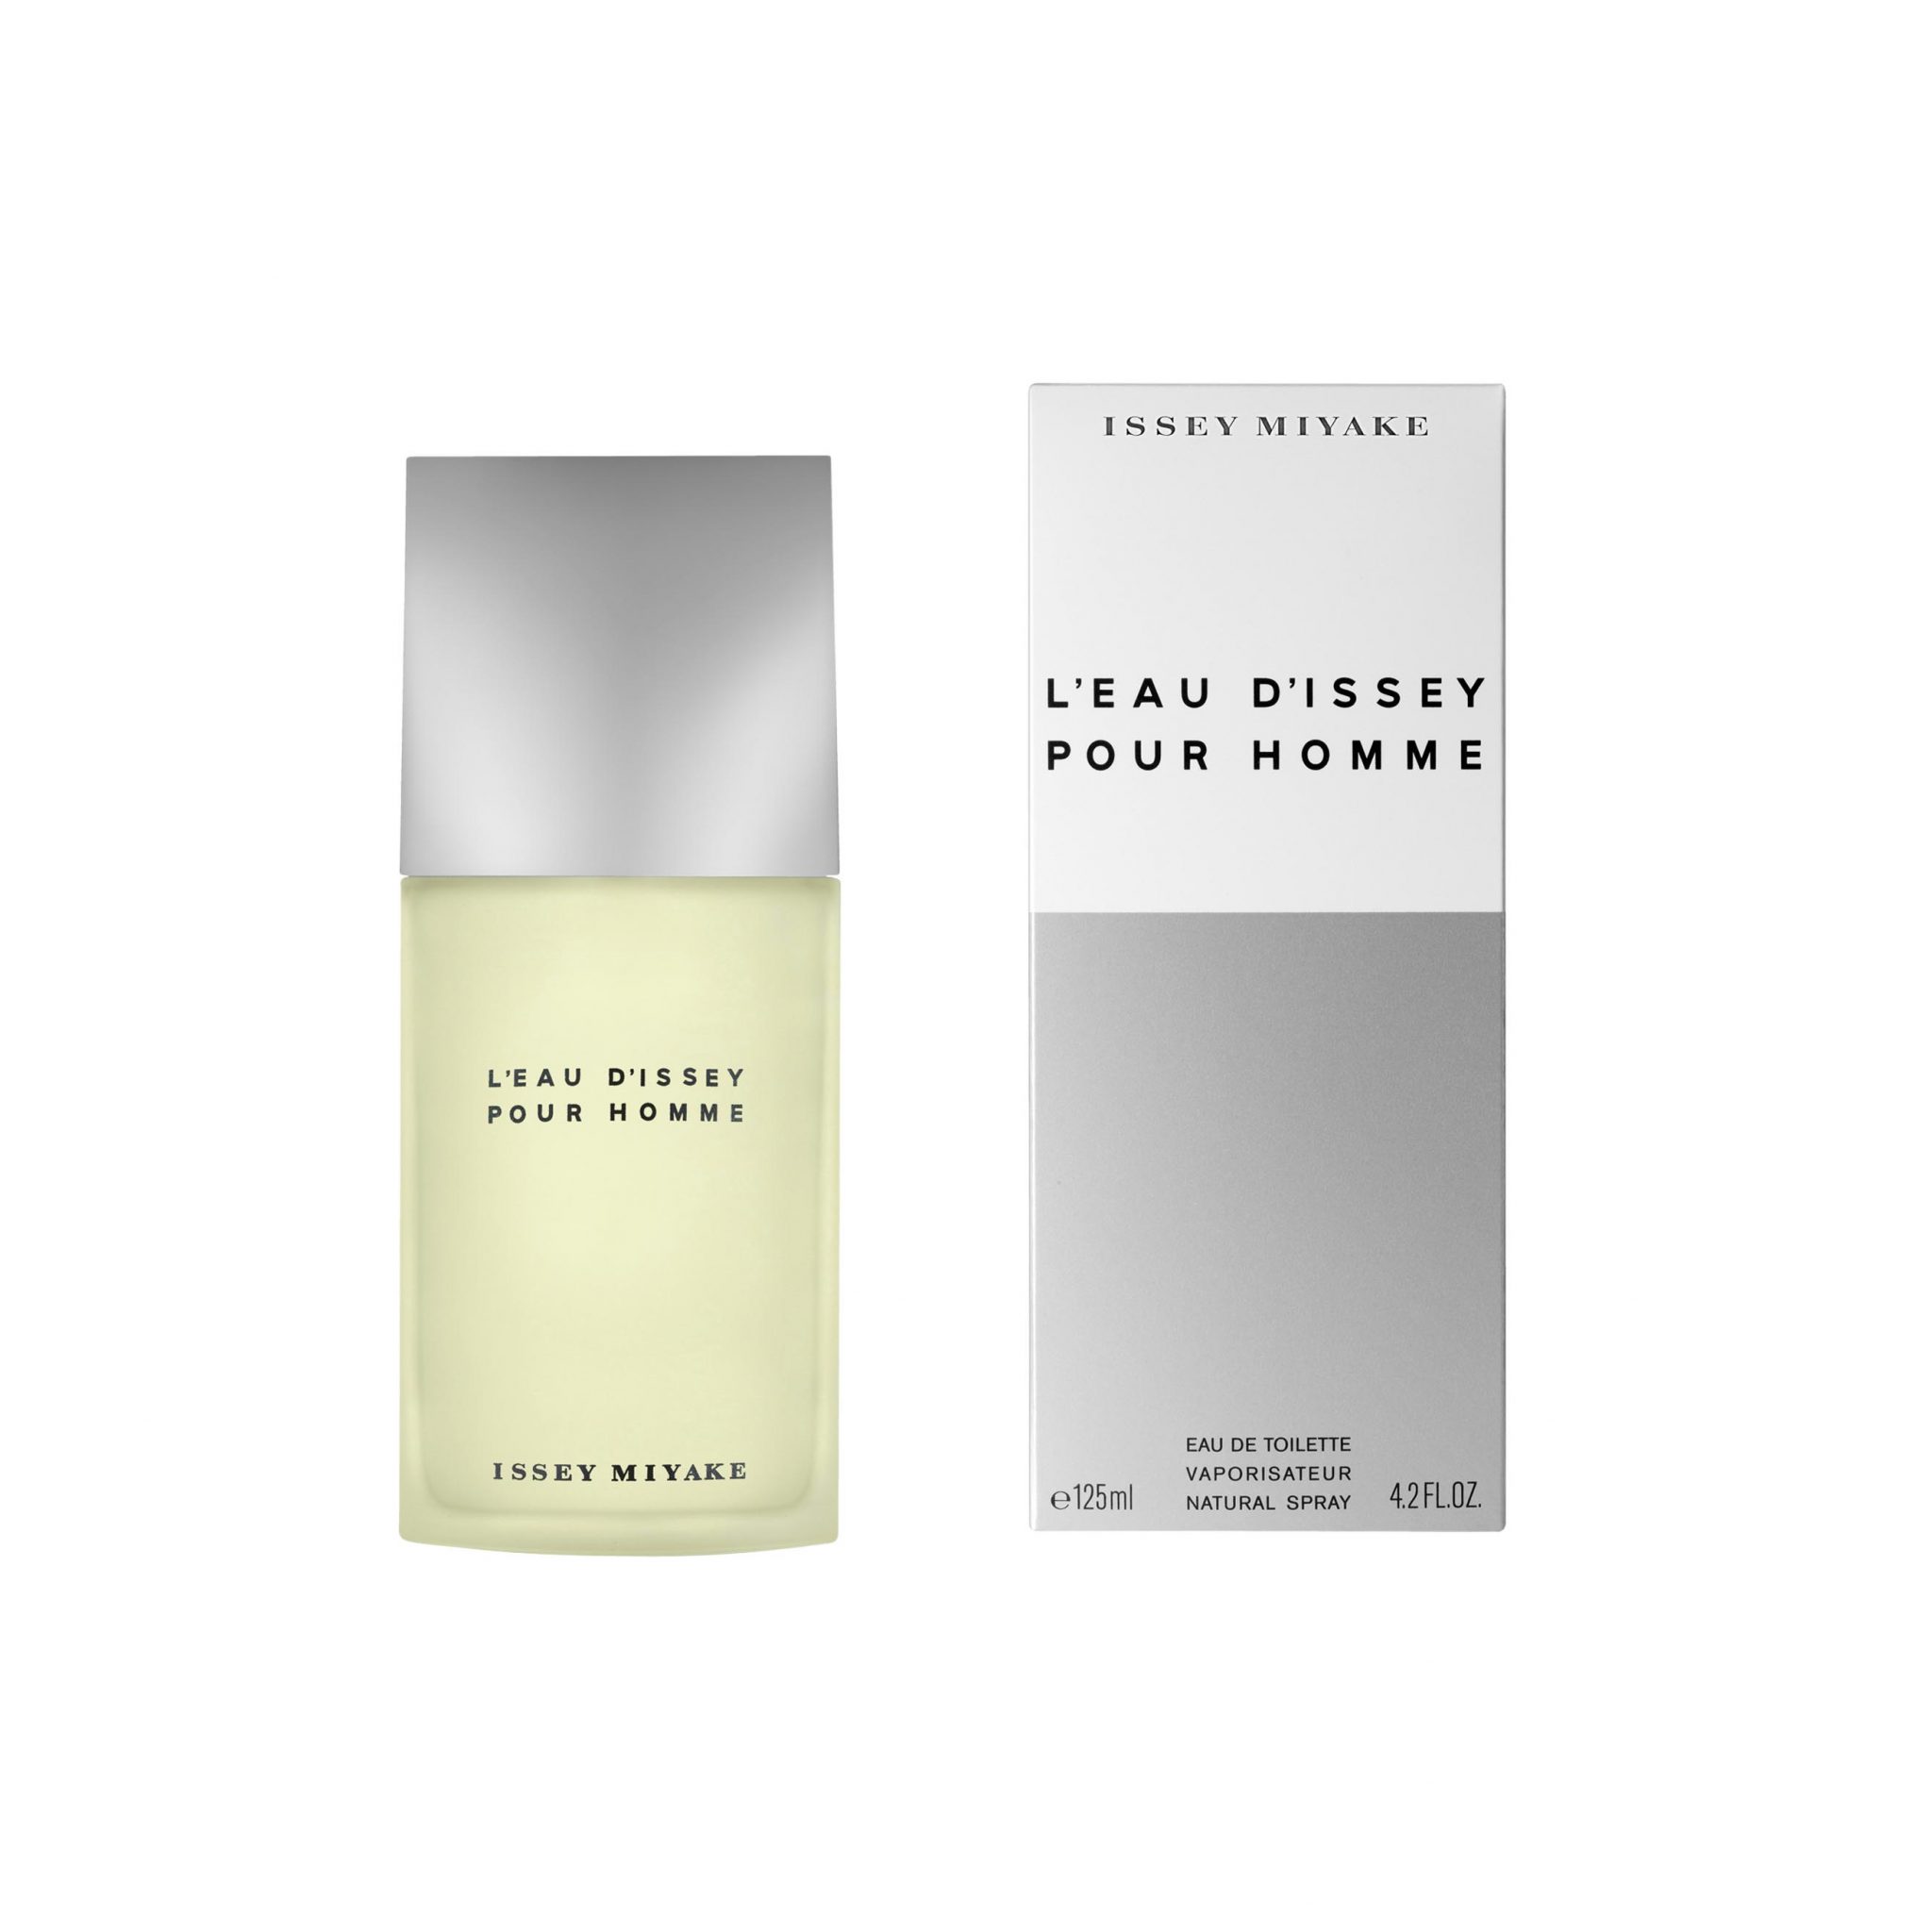 L'Eau d'Issey Pour Homme | Issey Miyake